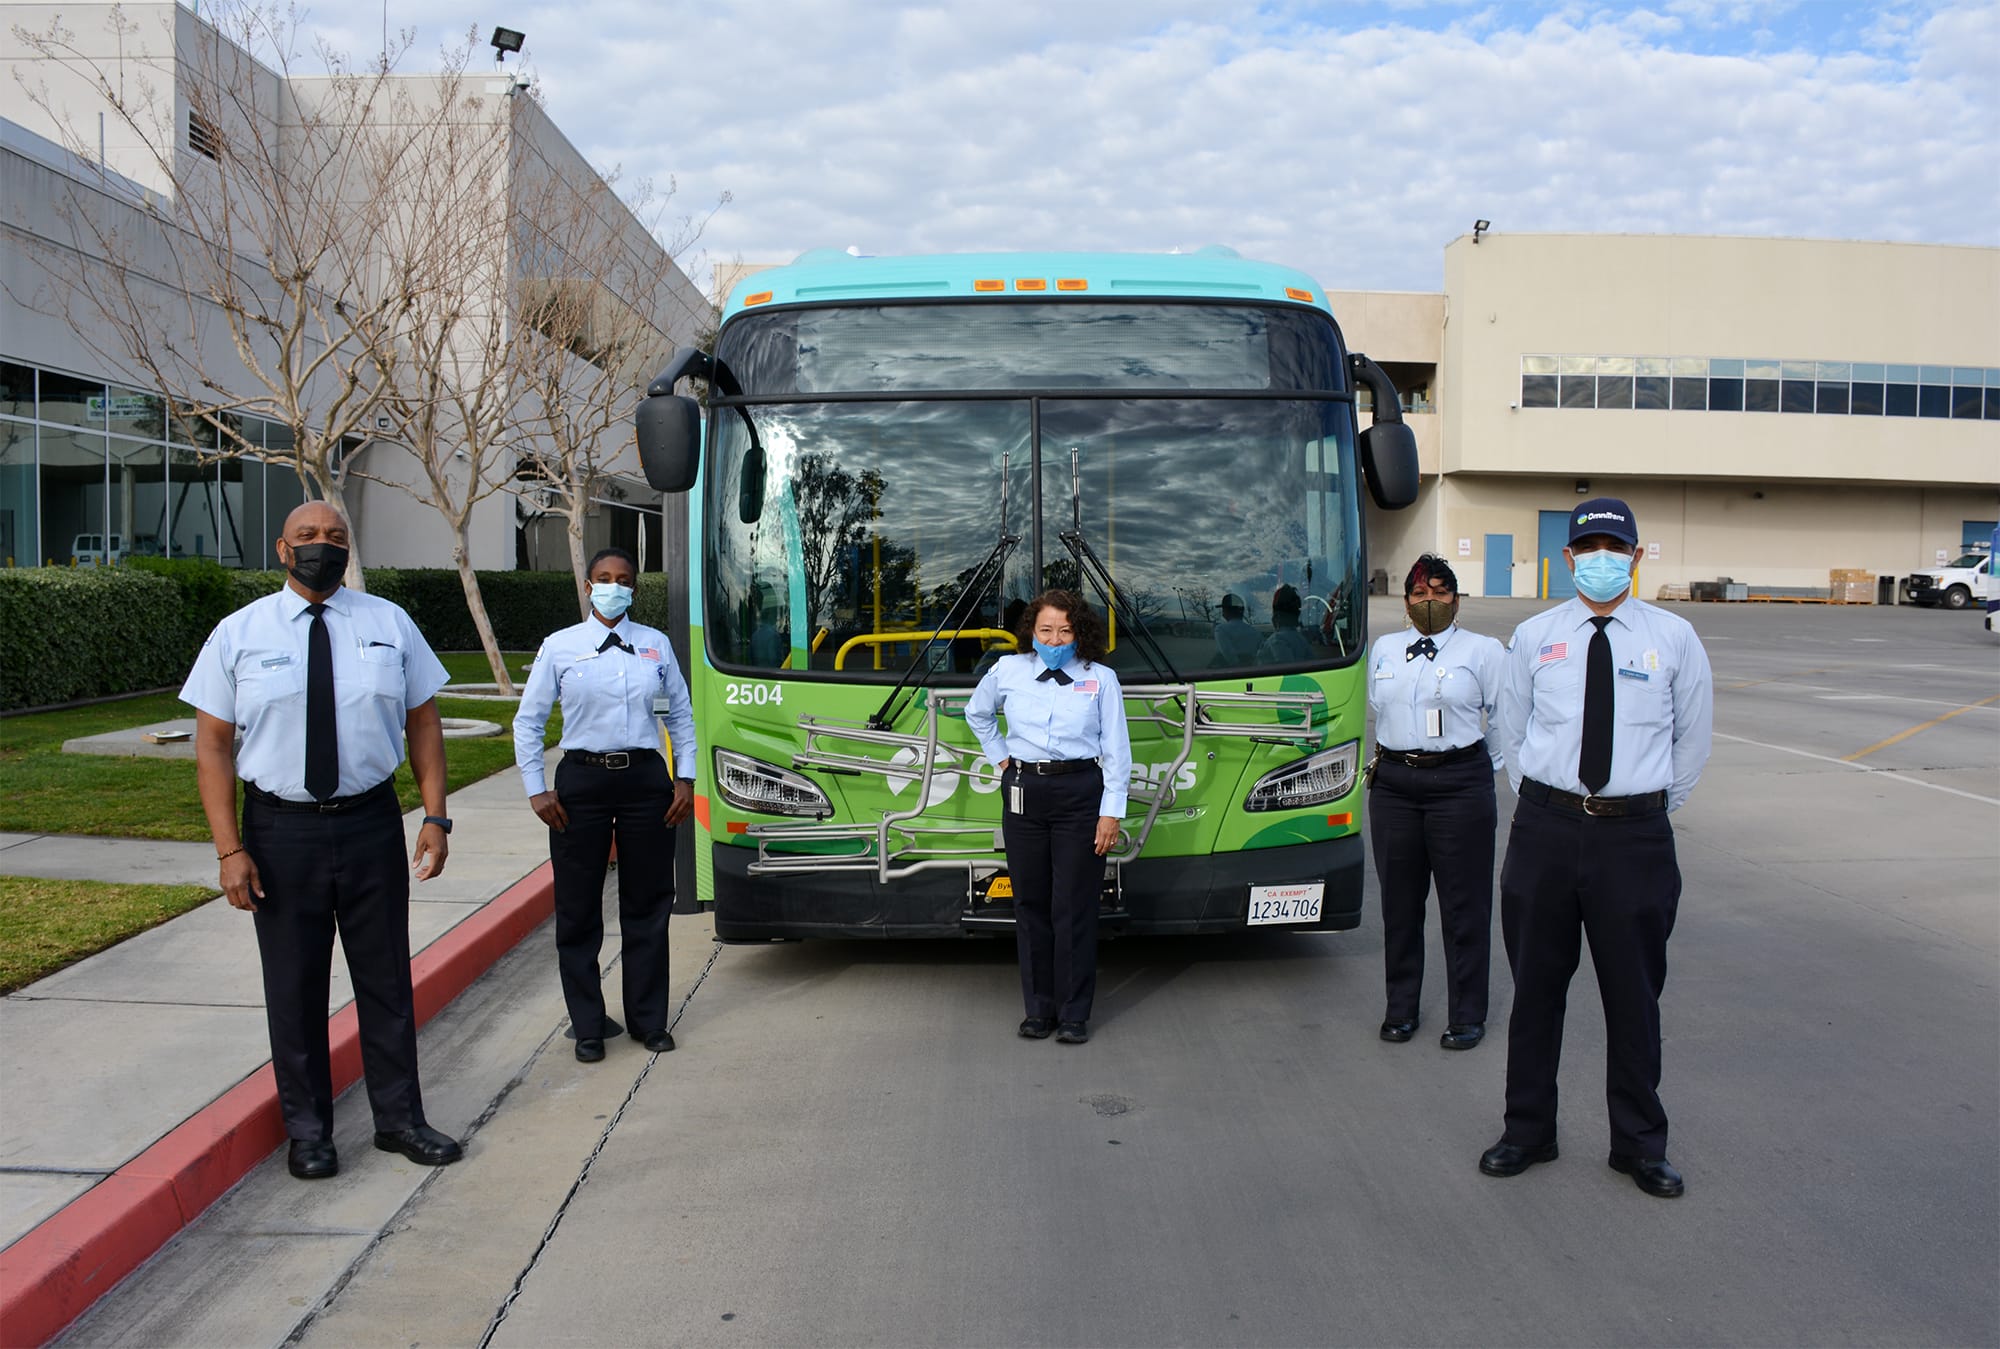 Million Mile Coach Operators Receive Award for Safe Driving Record